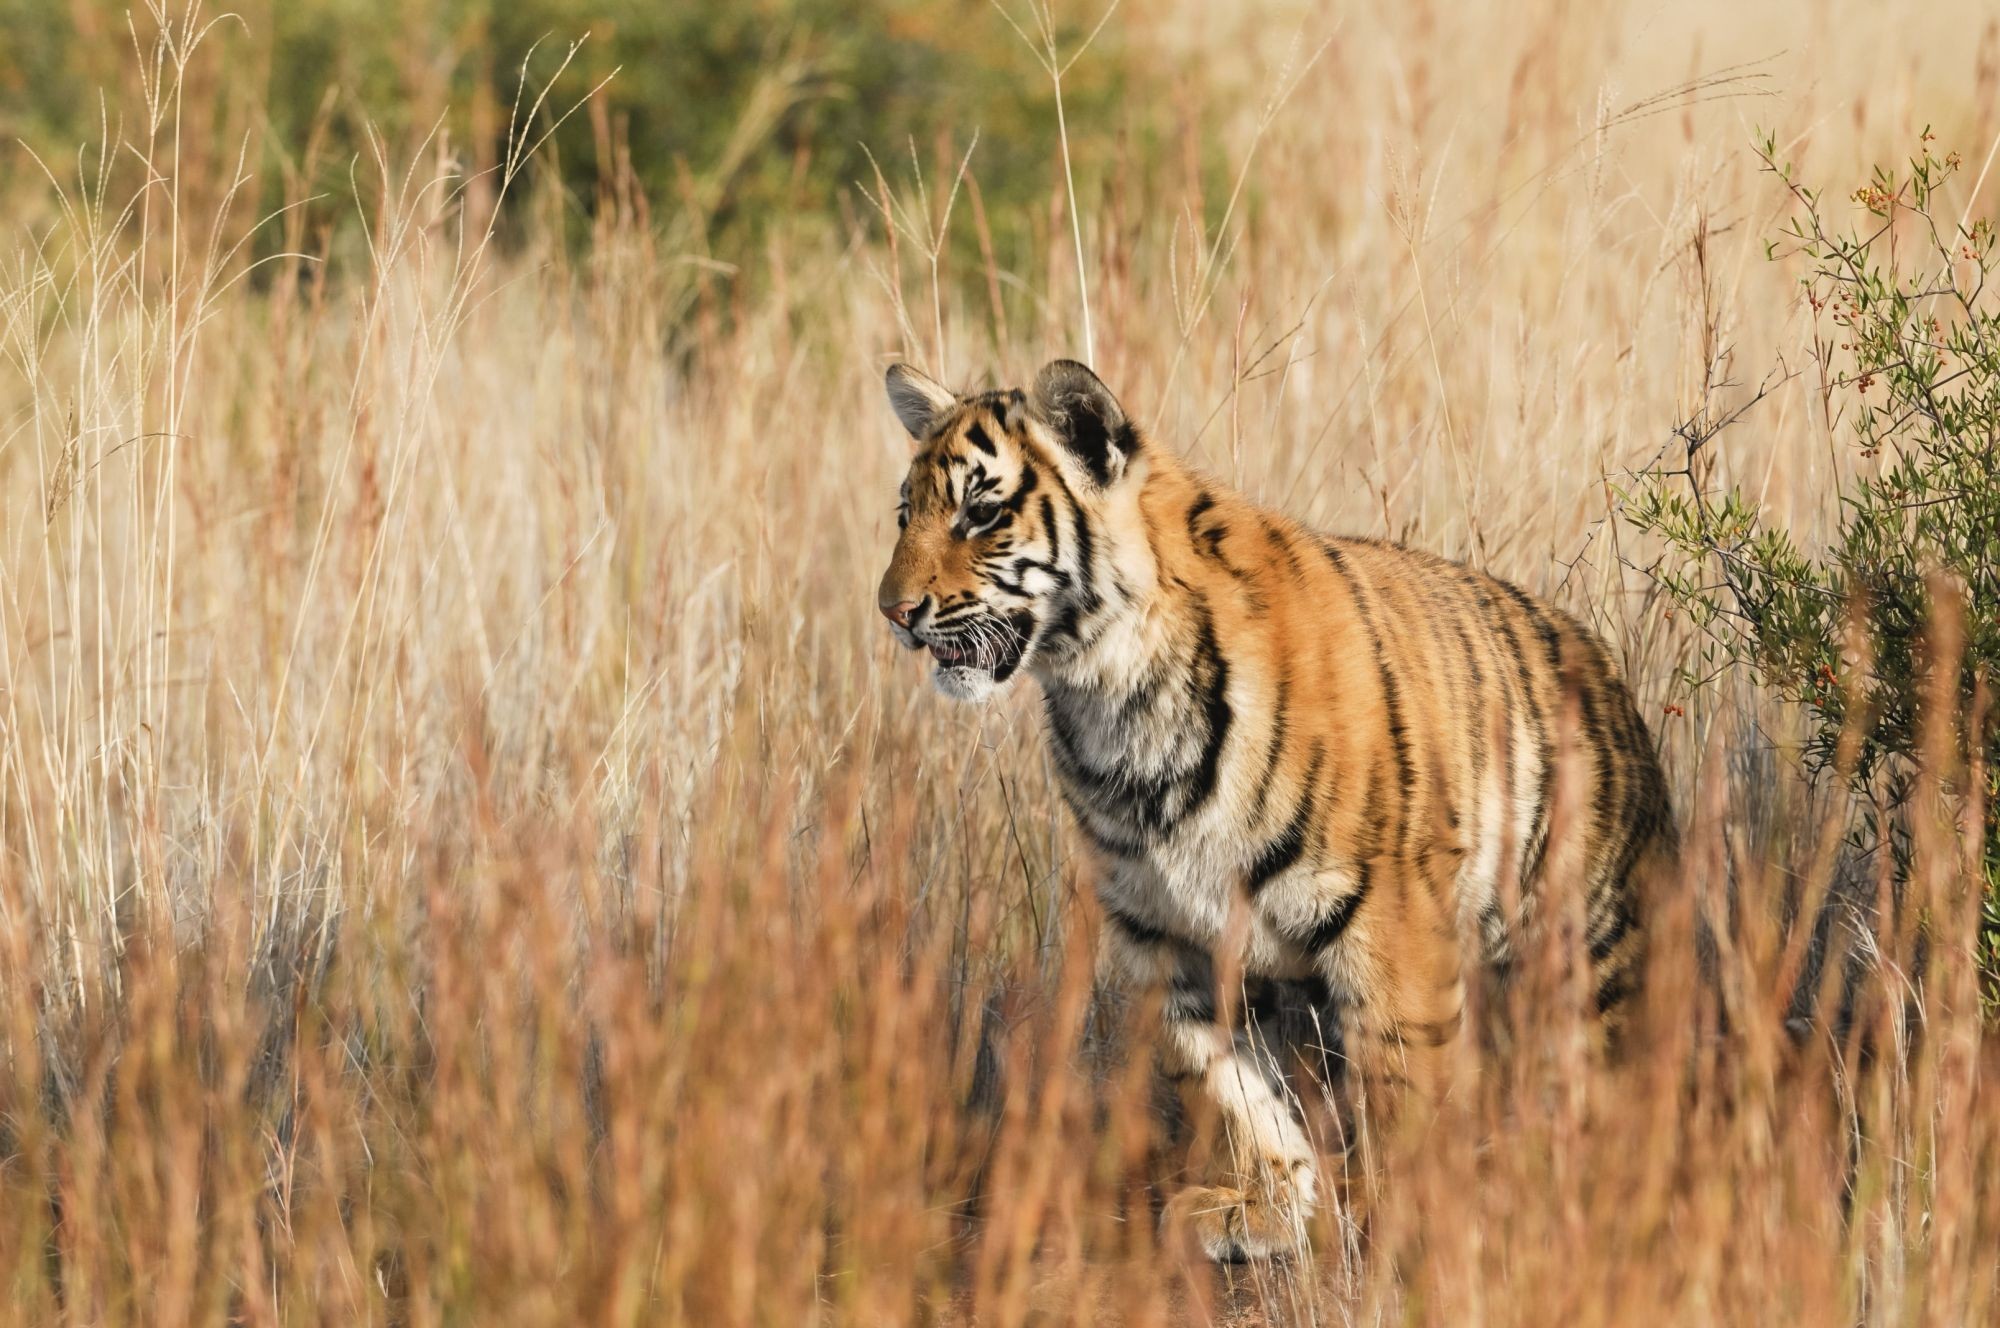 11 facts about tigers in the wild and in captivity | World Animal Protection